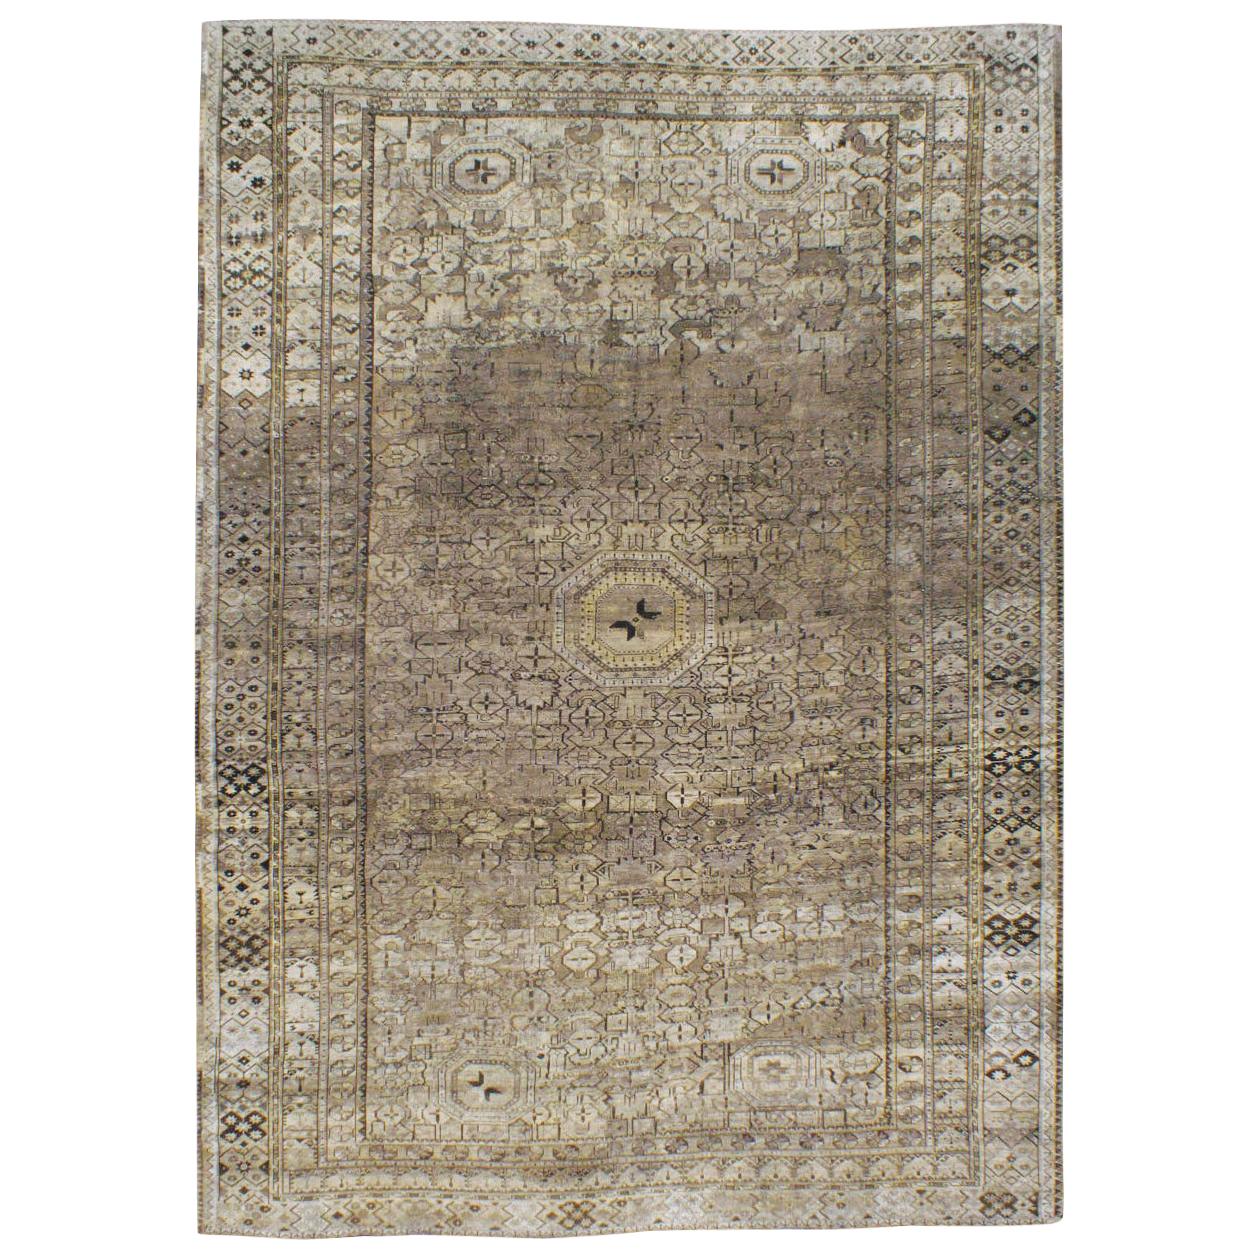 Early 20th Century Beshir Large Room Size Tribal Rug in Neutral Earth Tones